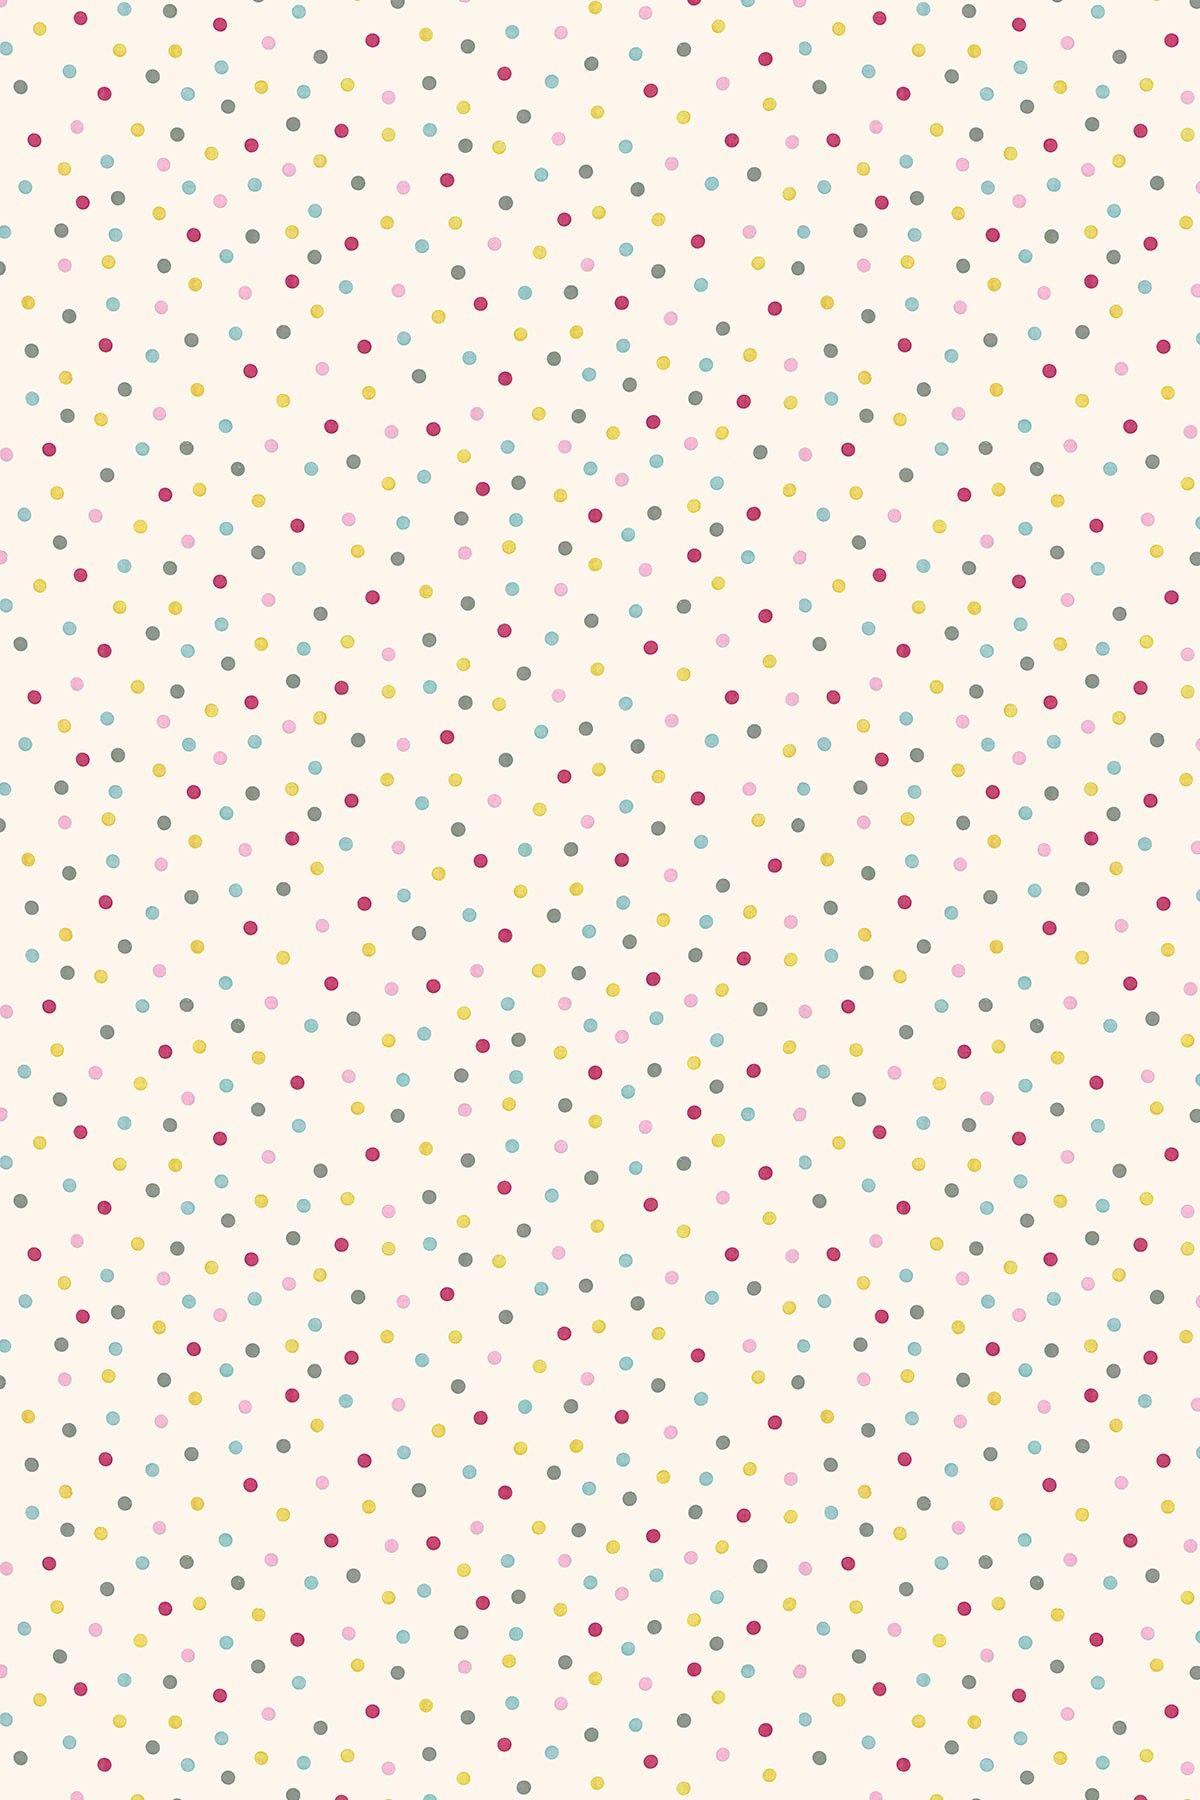 Details more than 58 polka dots wallpaper best - in.cdgdbentre